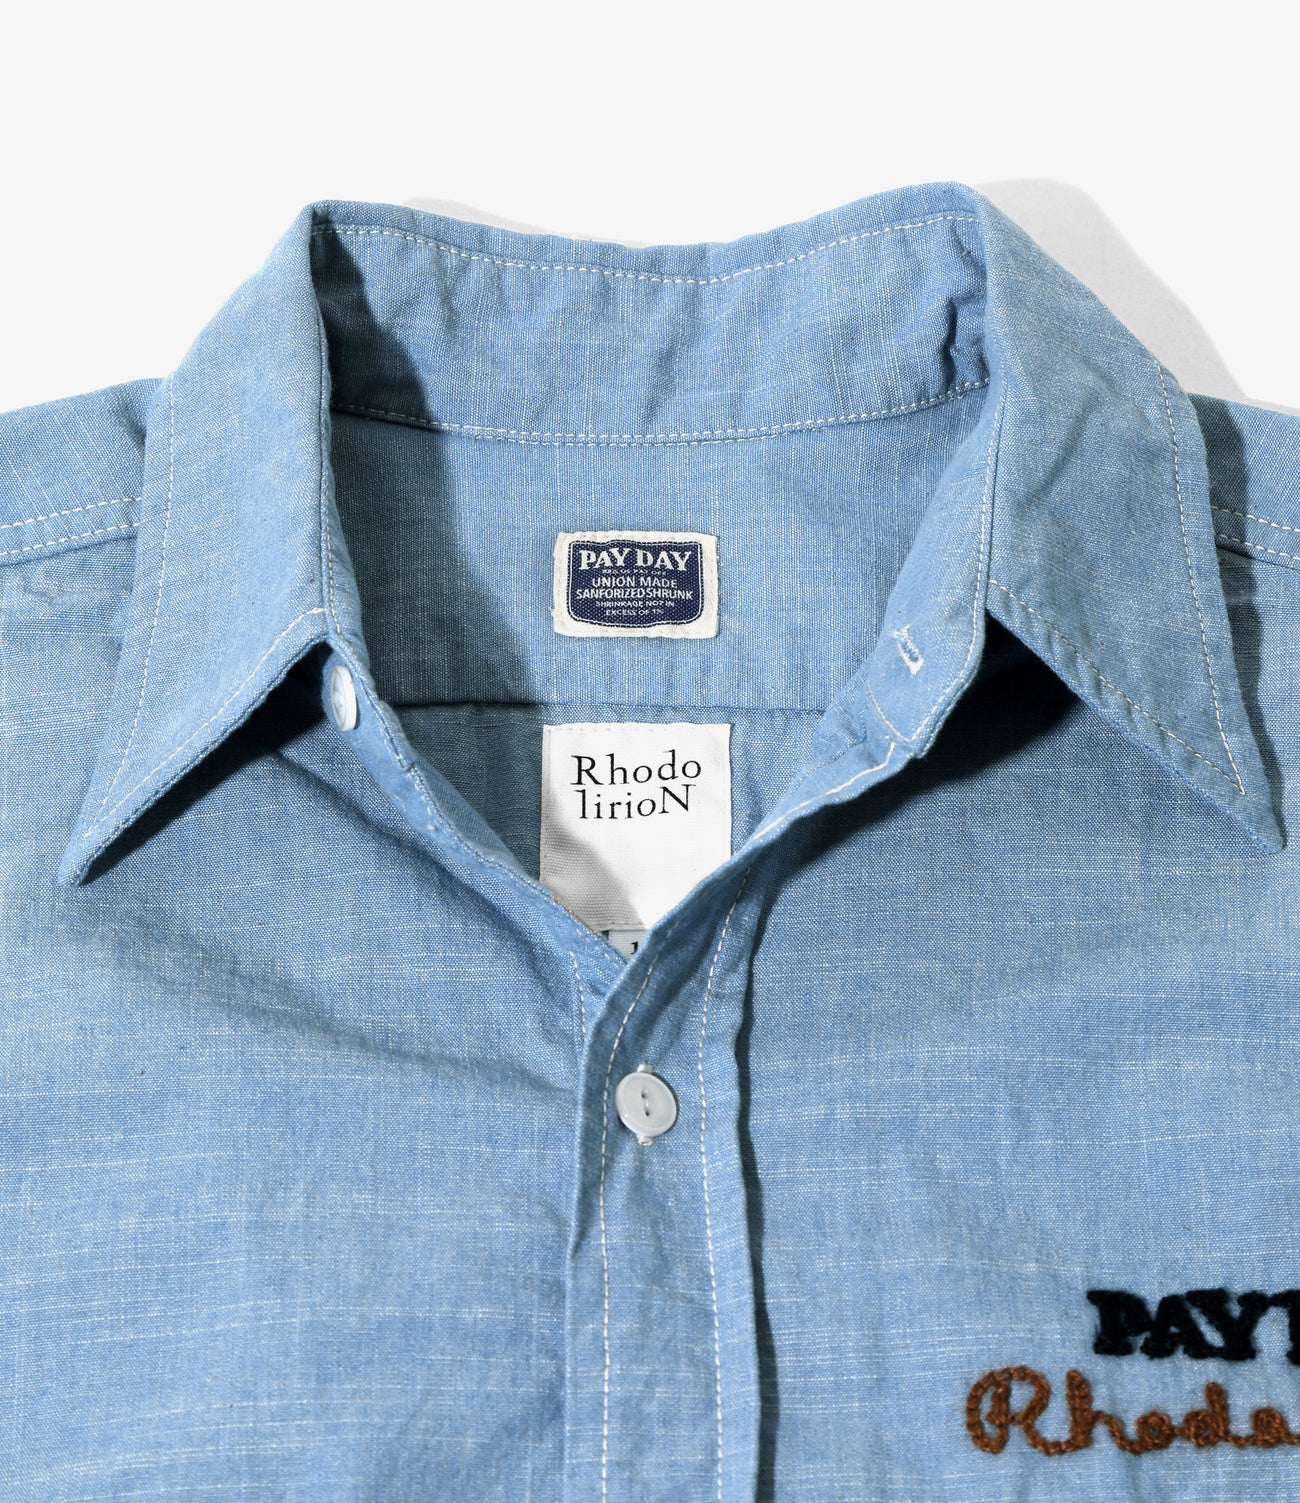 Rhodolirion × Pay Day Work Shirt - Chambray Blue – NEPENTHES